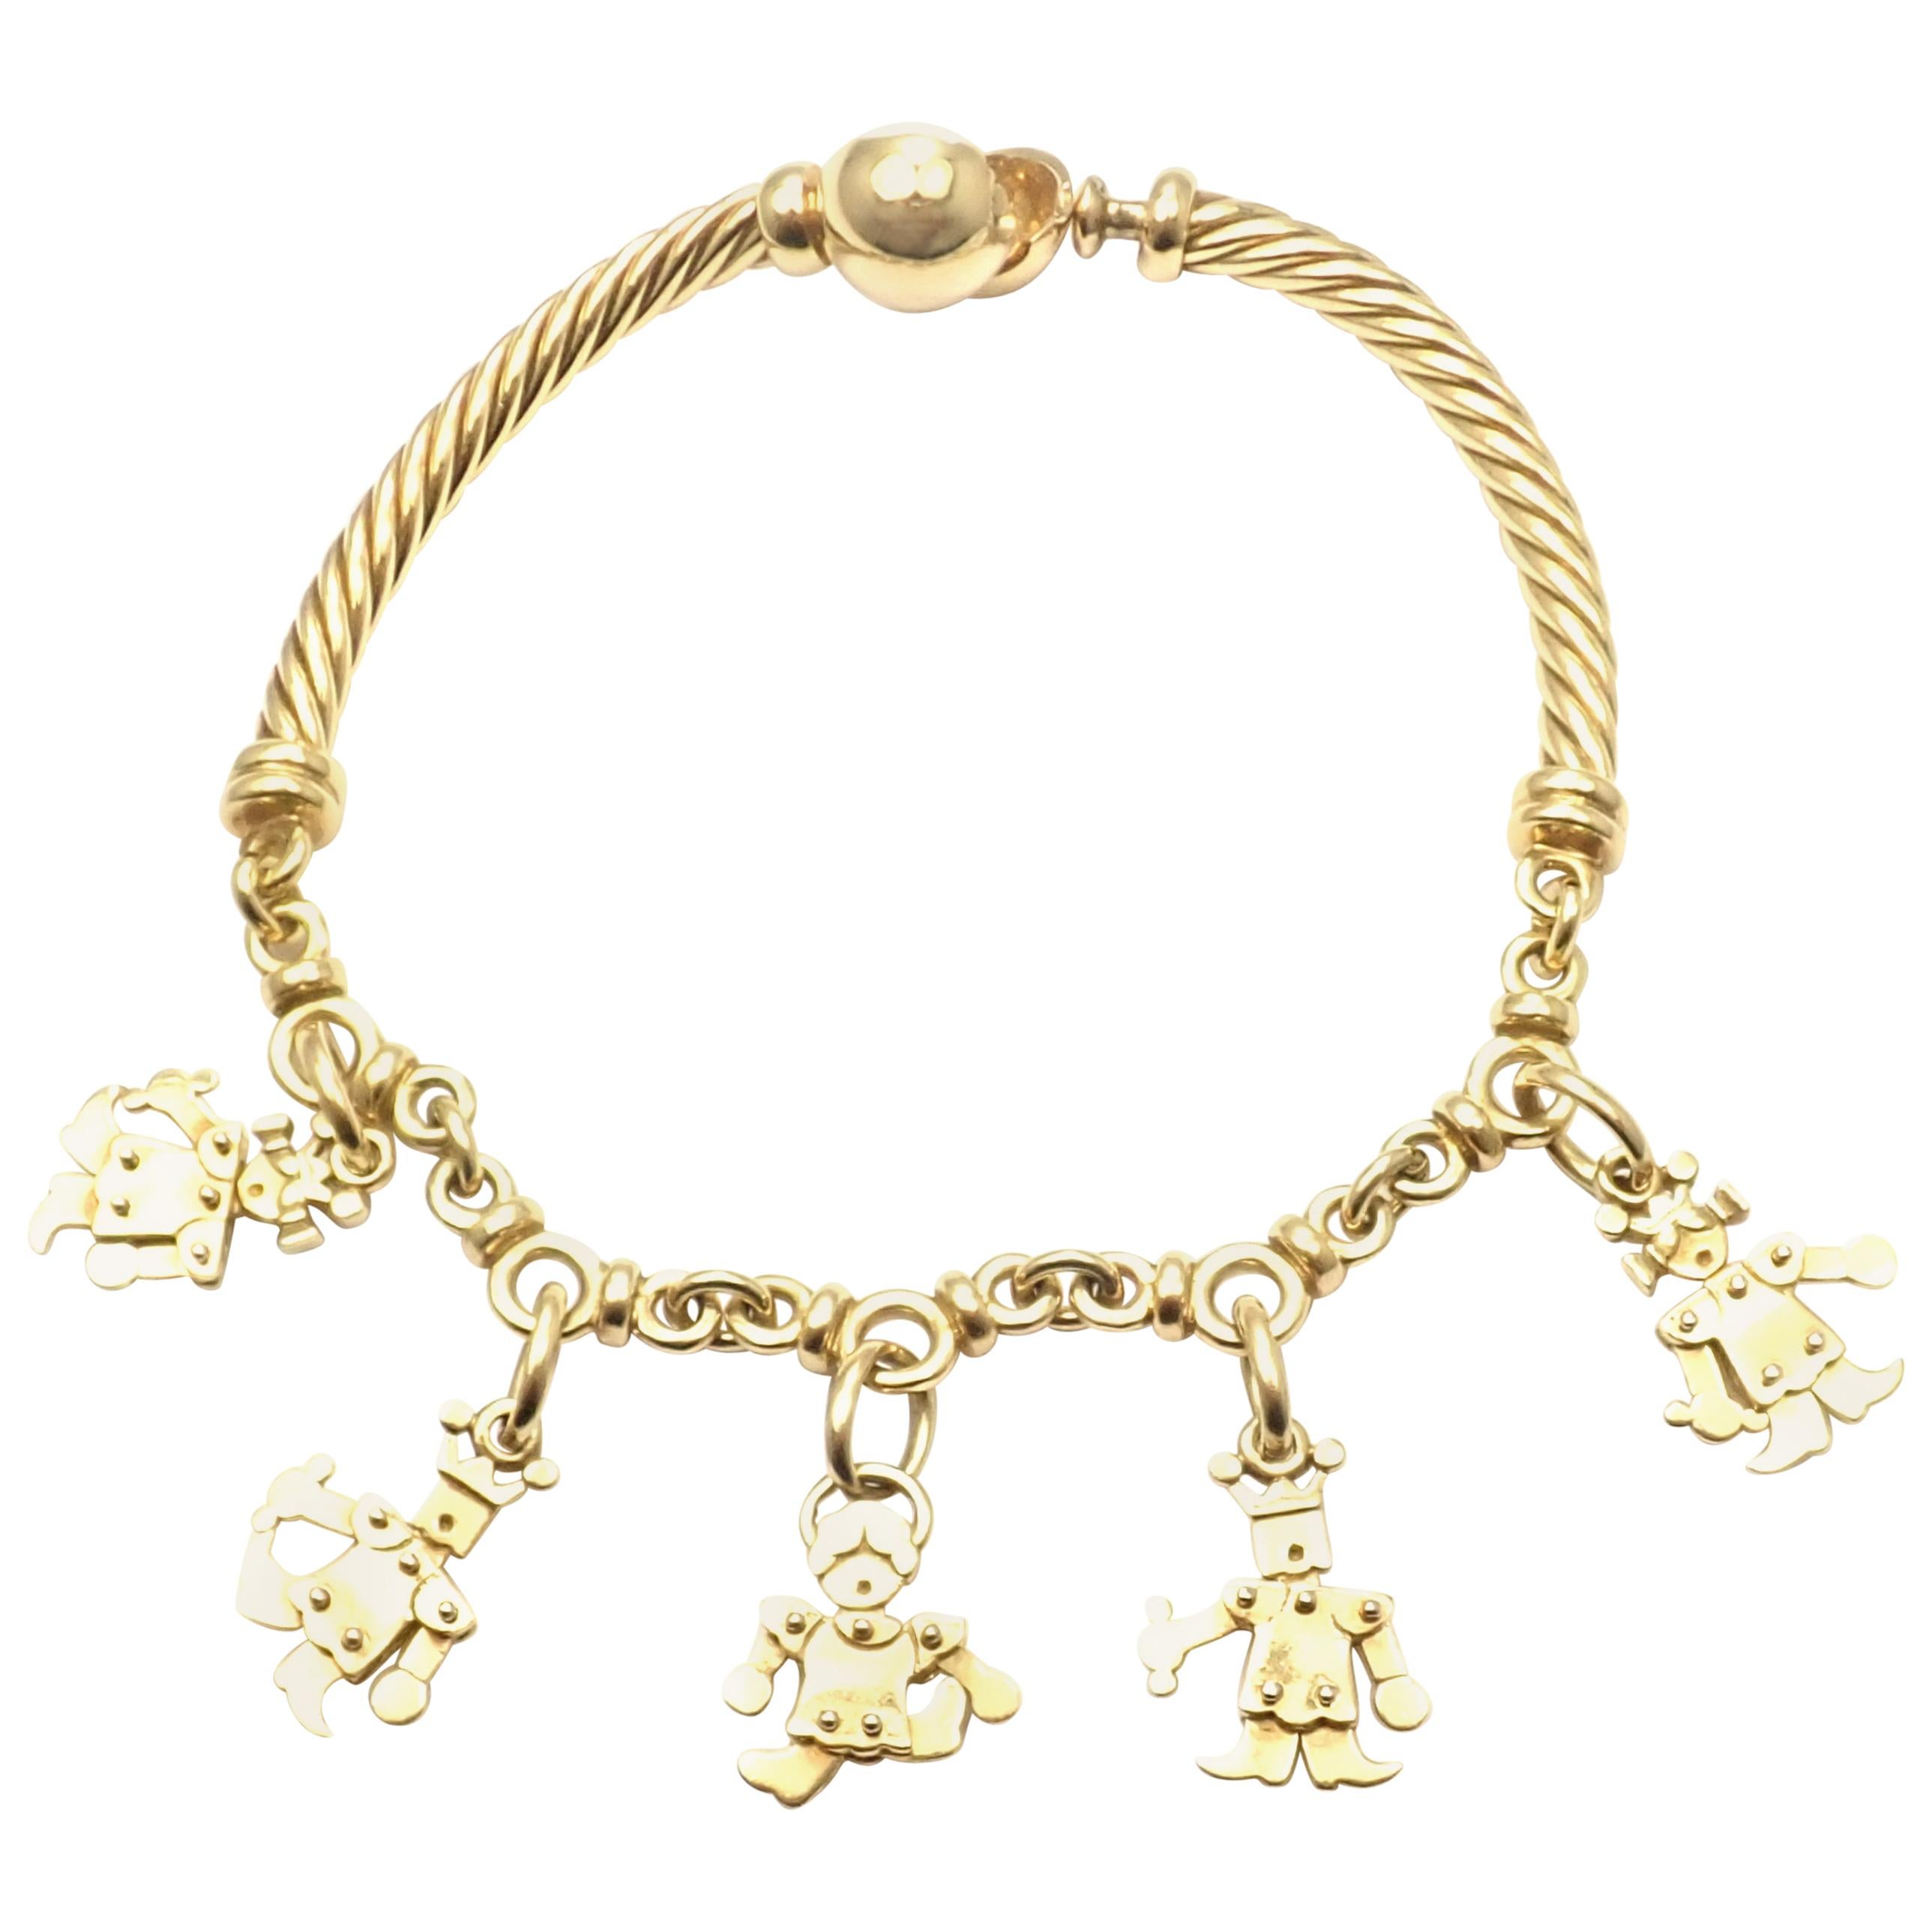 Pomellato King and Queen Yellow Gold Charm Bangle Bracelet